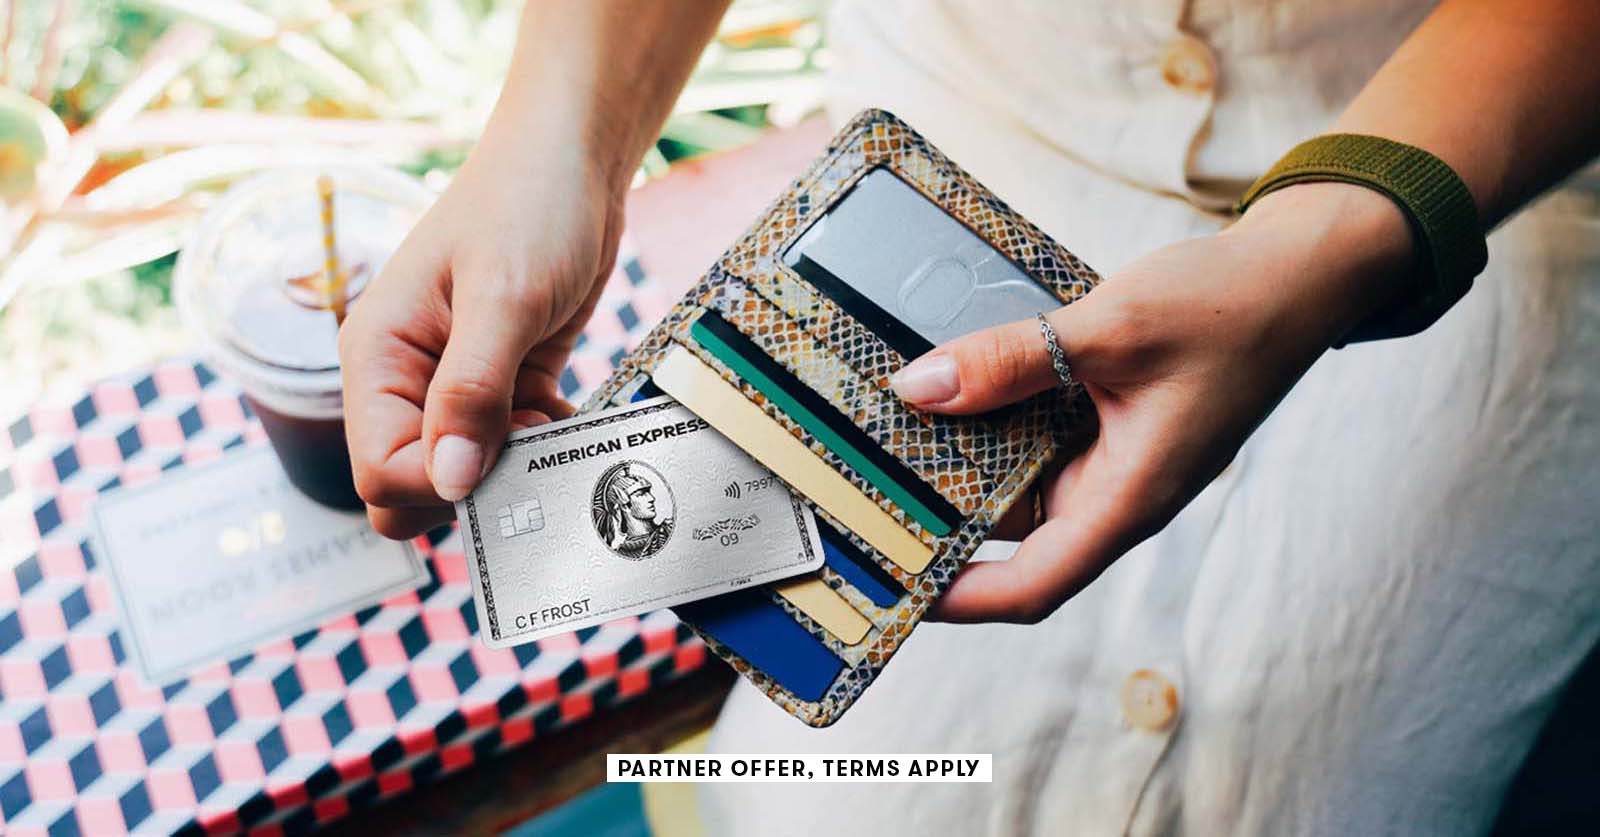 Check your Amex Offers: Amazon bonus points are back for some cardmembers